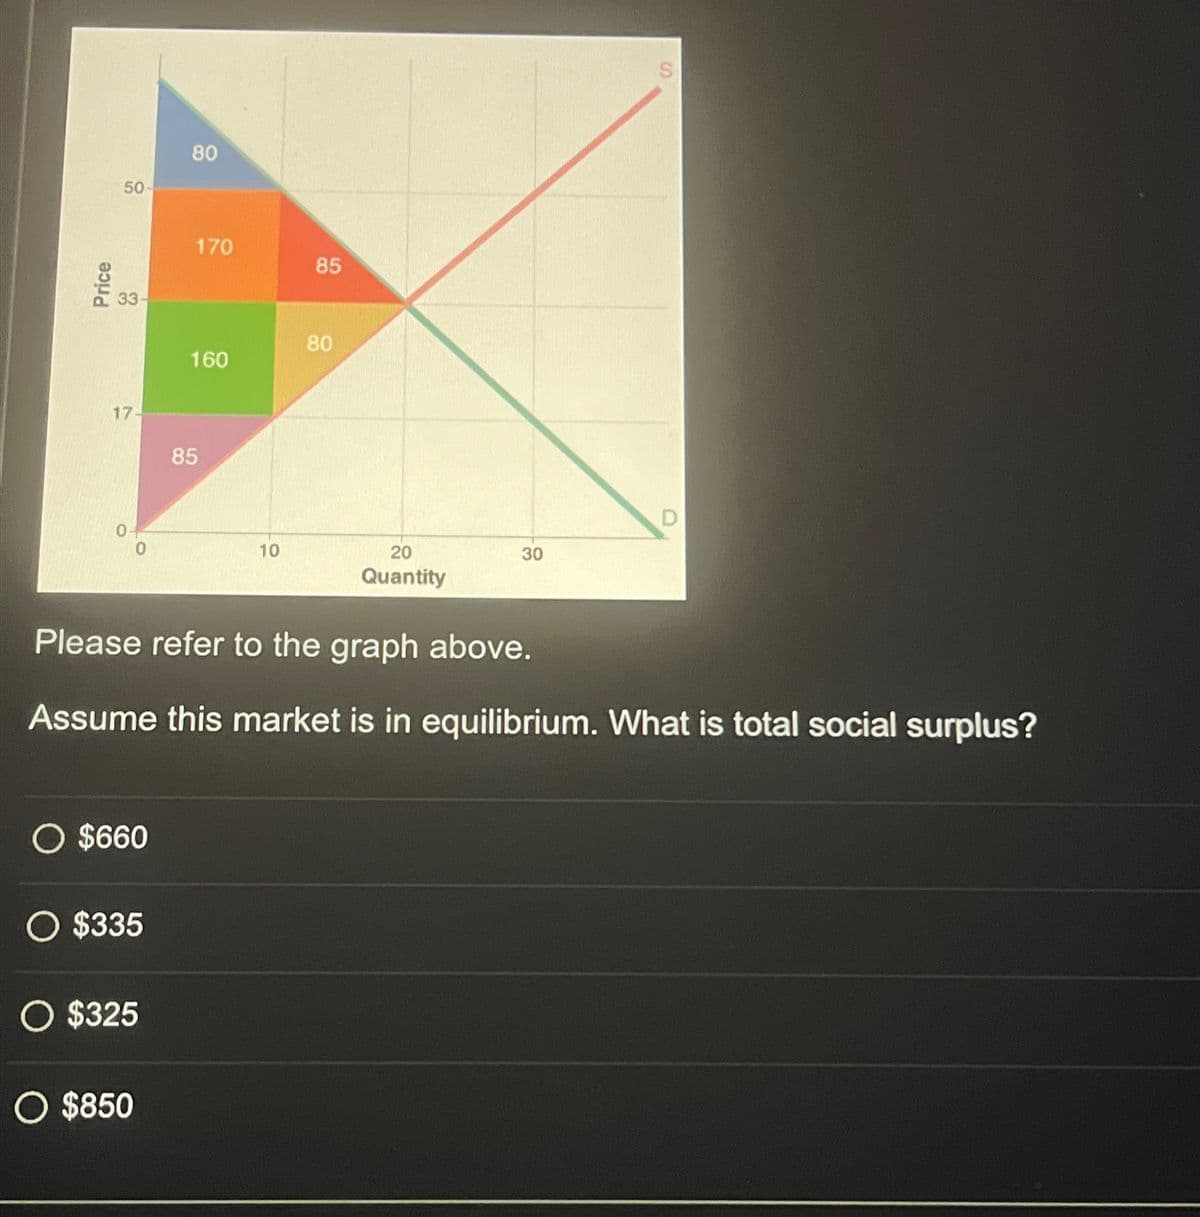 Price
50-
80
33-
17-
85
170
85
160
80
10
20
30
Quantity
S
Please refer to the graph above.
Assume this market is in equilibrium. What is total social surplus?
○ $660
○ $335
O $325
O $850